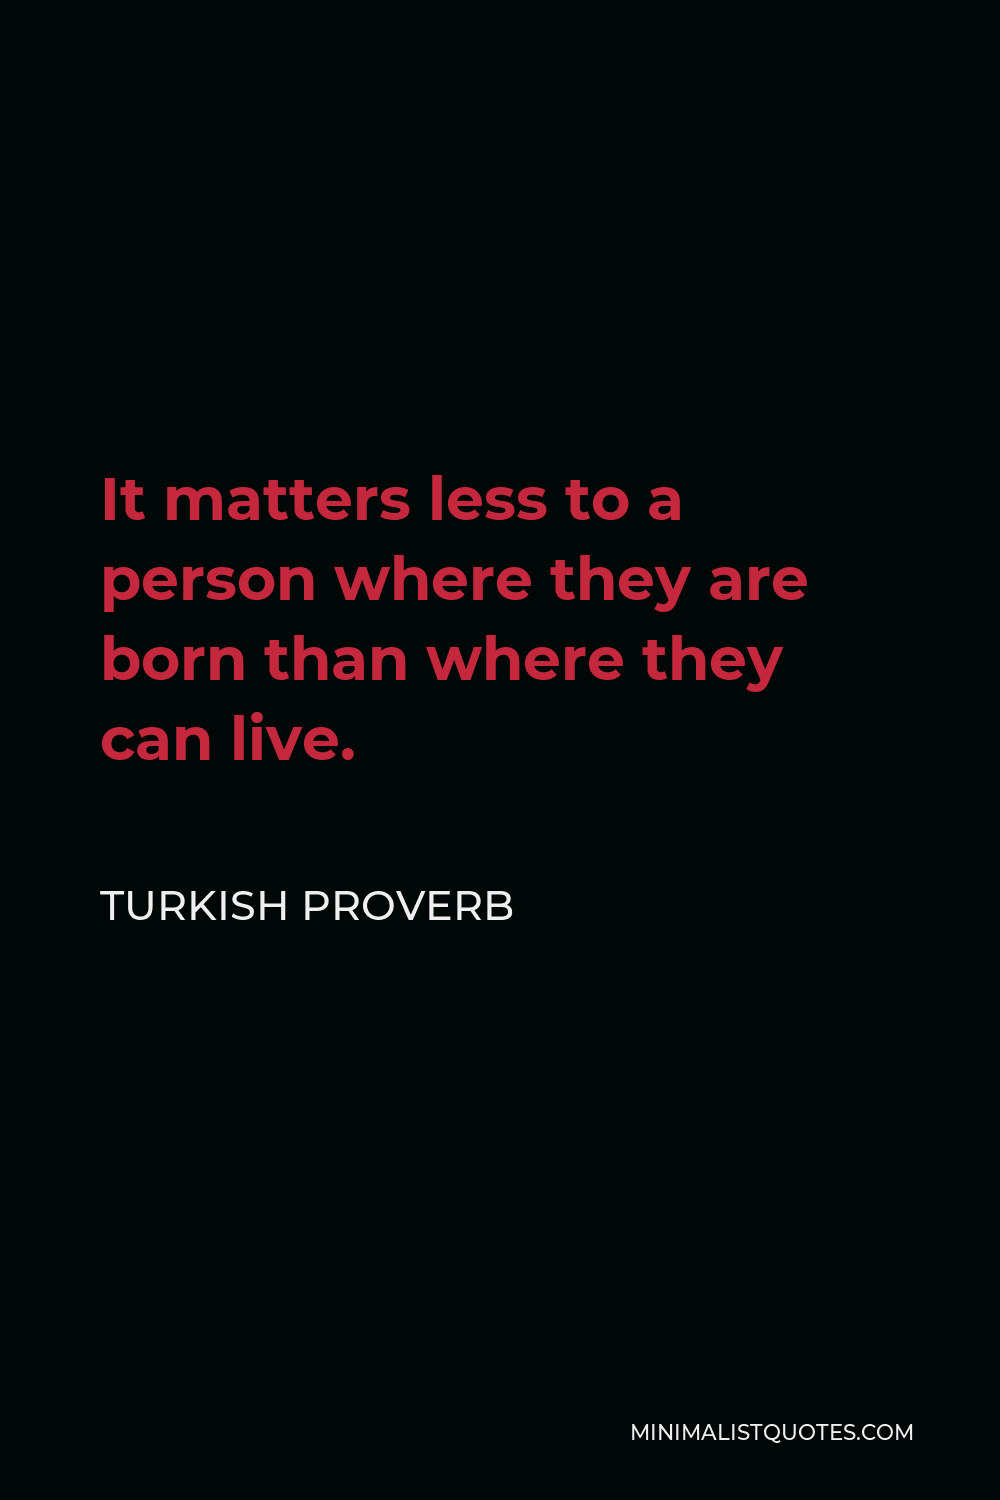 Turkish Proverb Quote - It matters less to a person where they are born than where they can live.